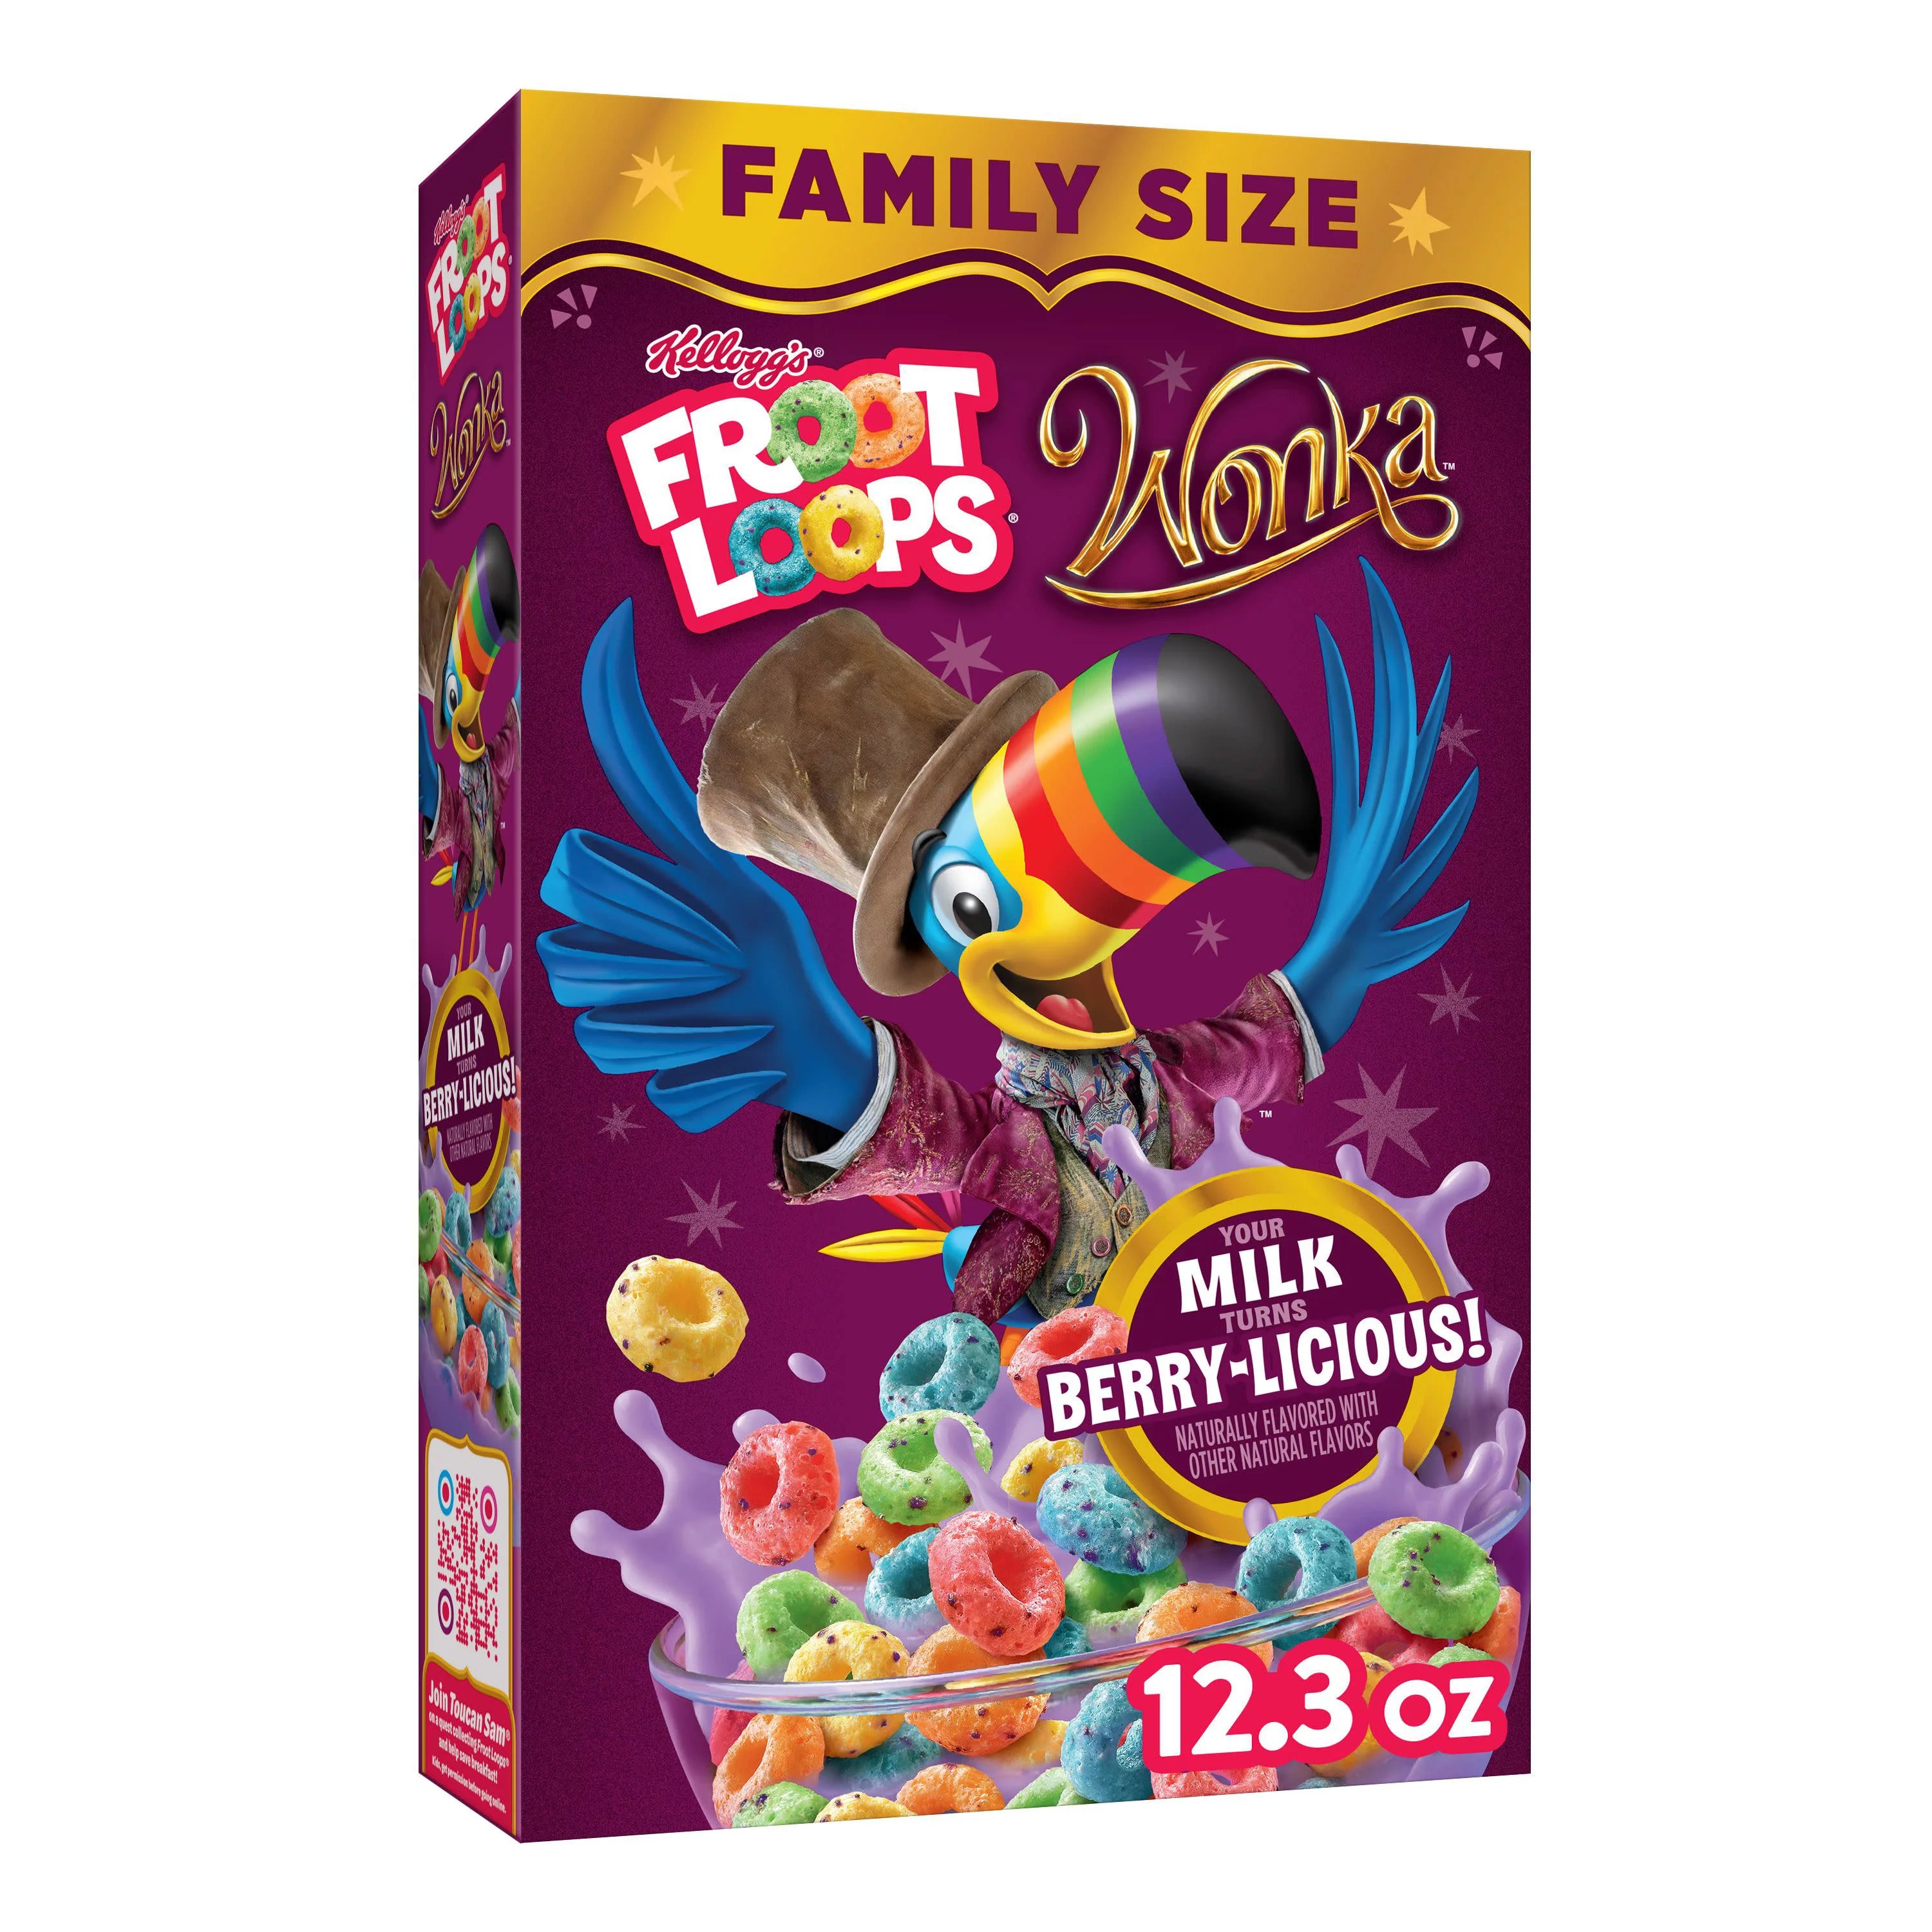 Froot Loops - Wonka Fruity Cereal - Family Size - 348g